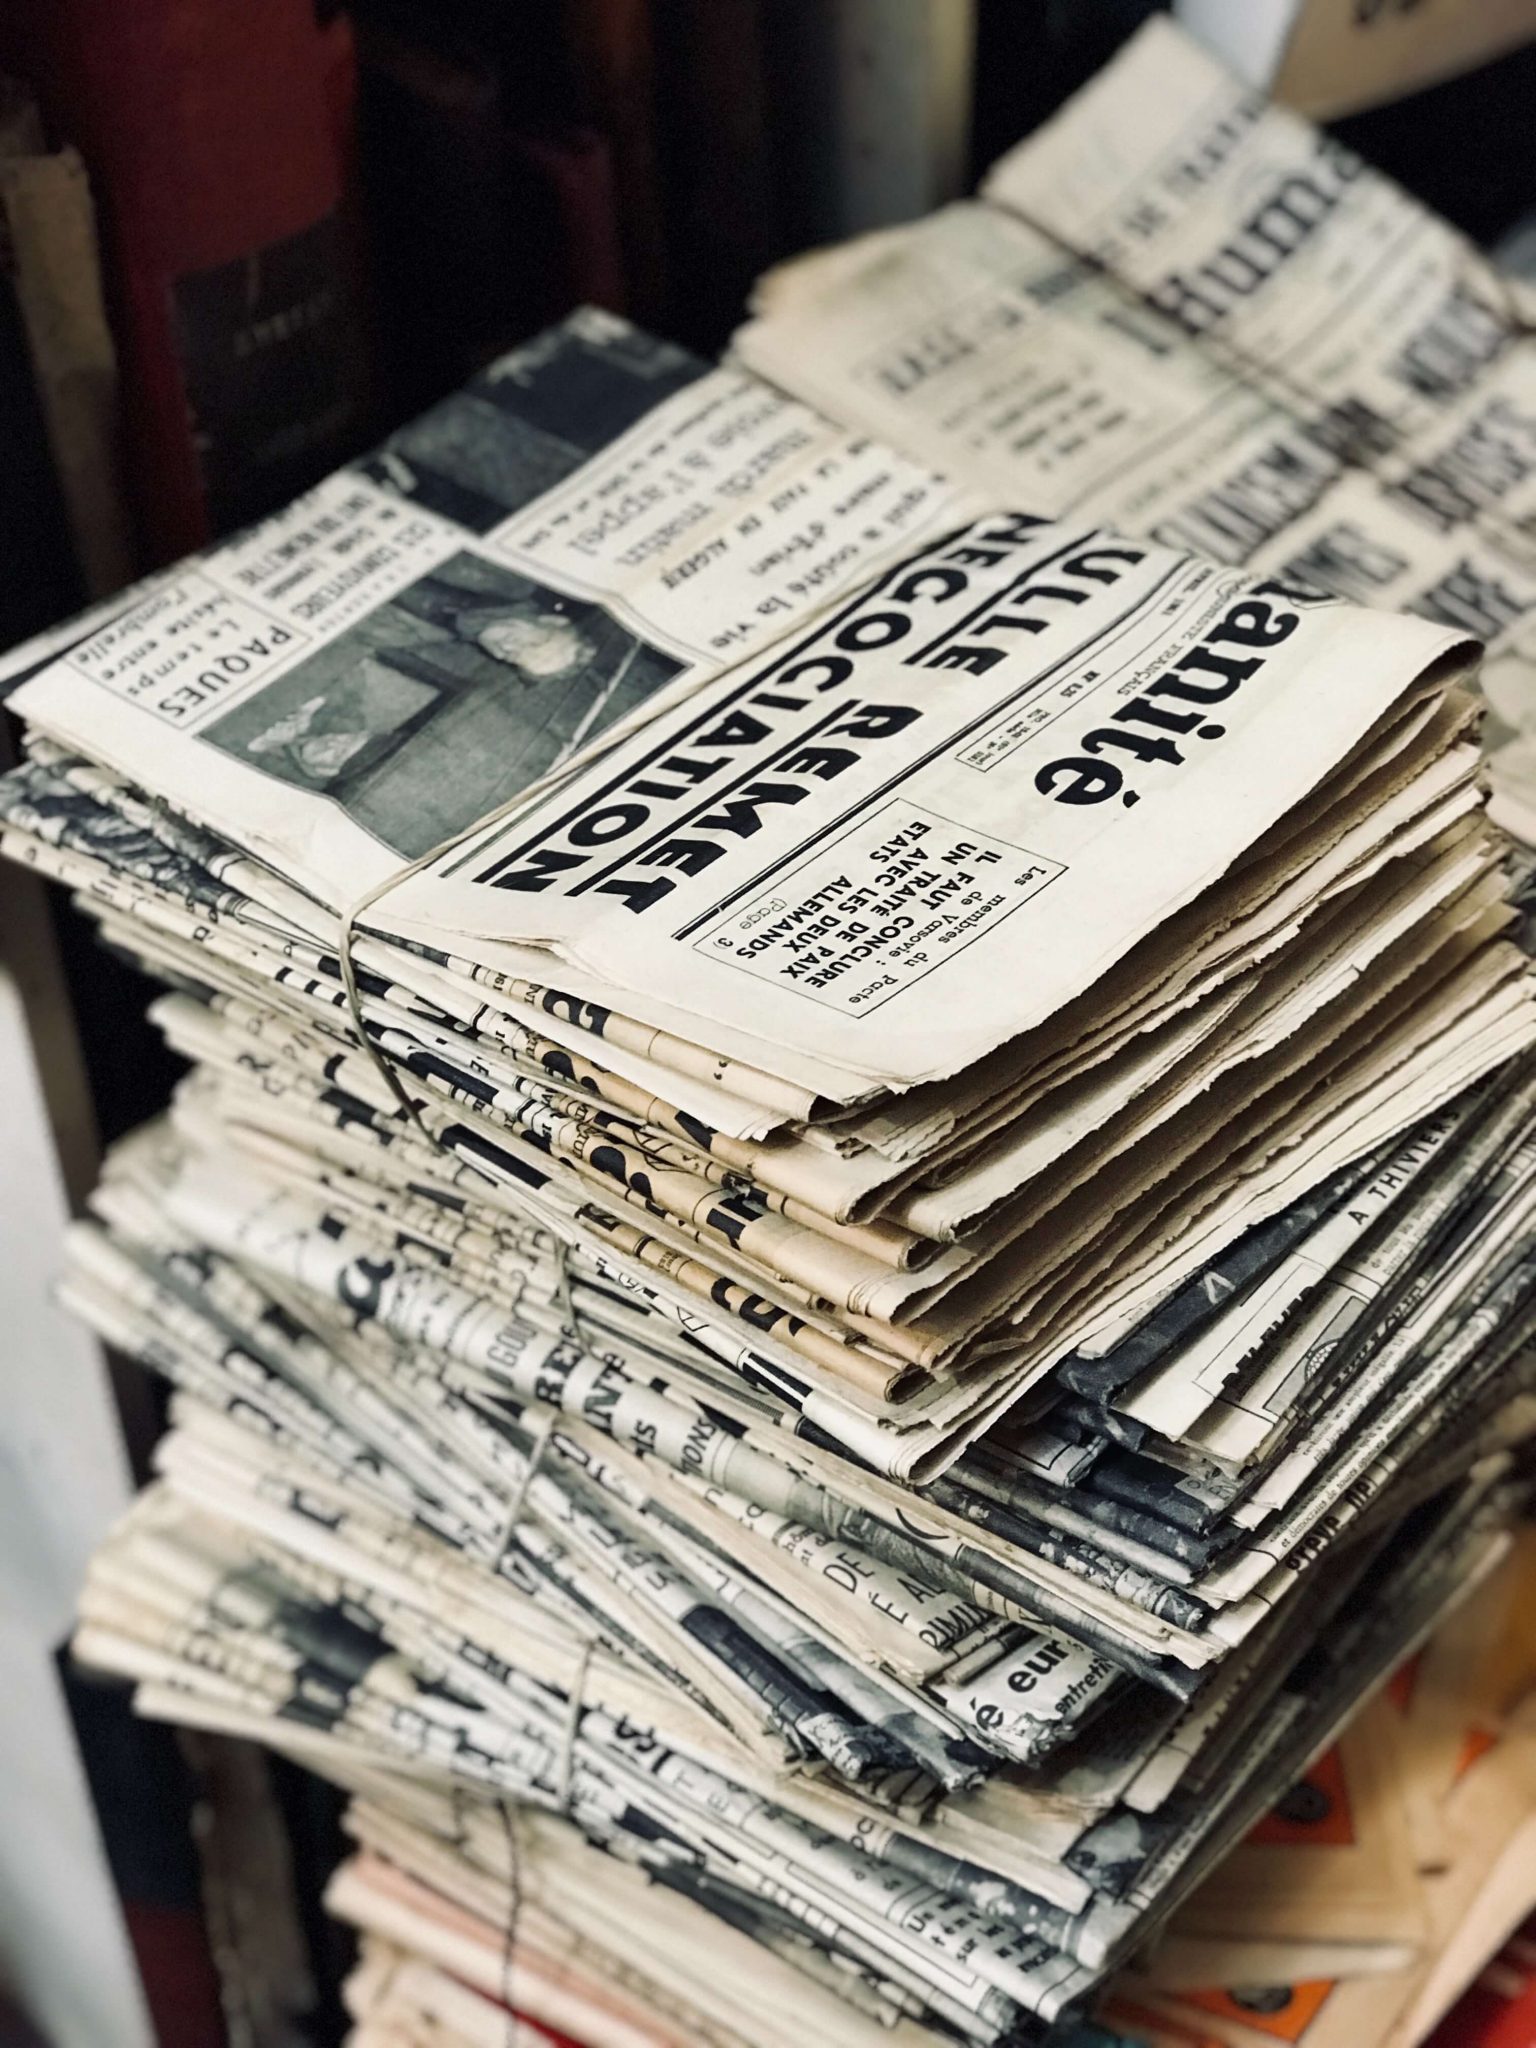 15-best-places-where-to-get-free-newspapers-packing-reading